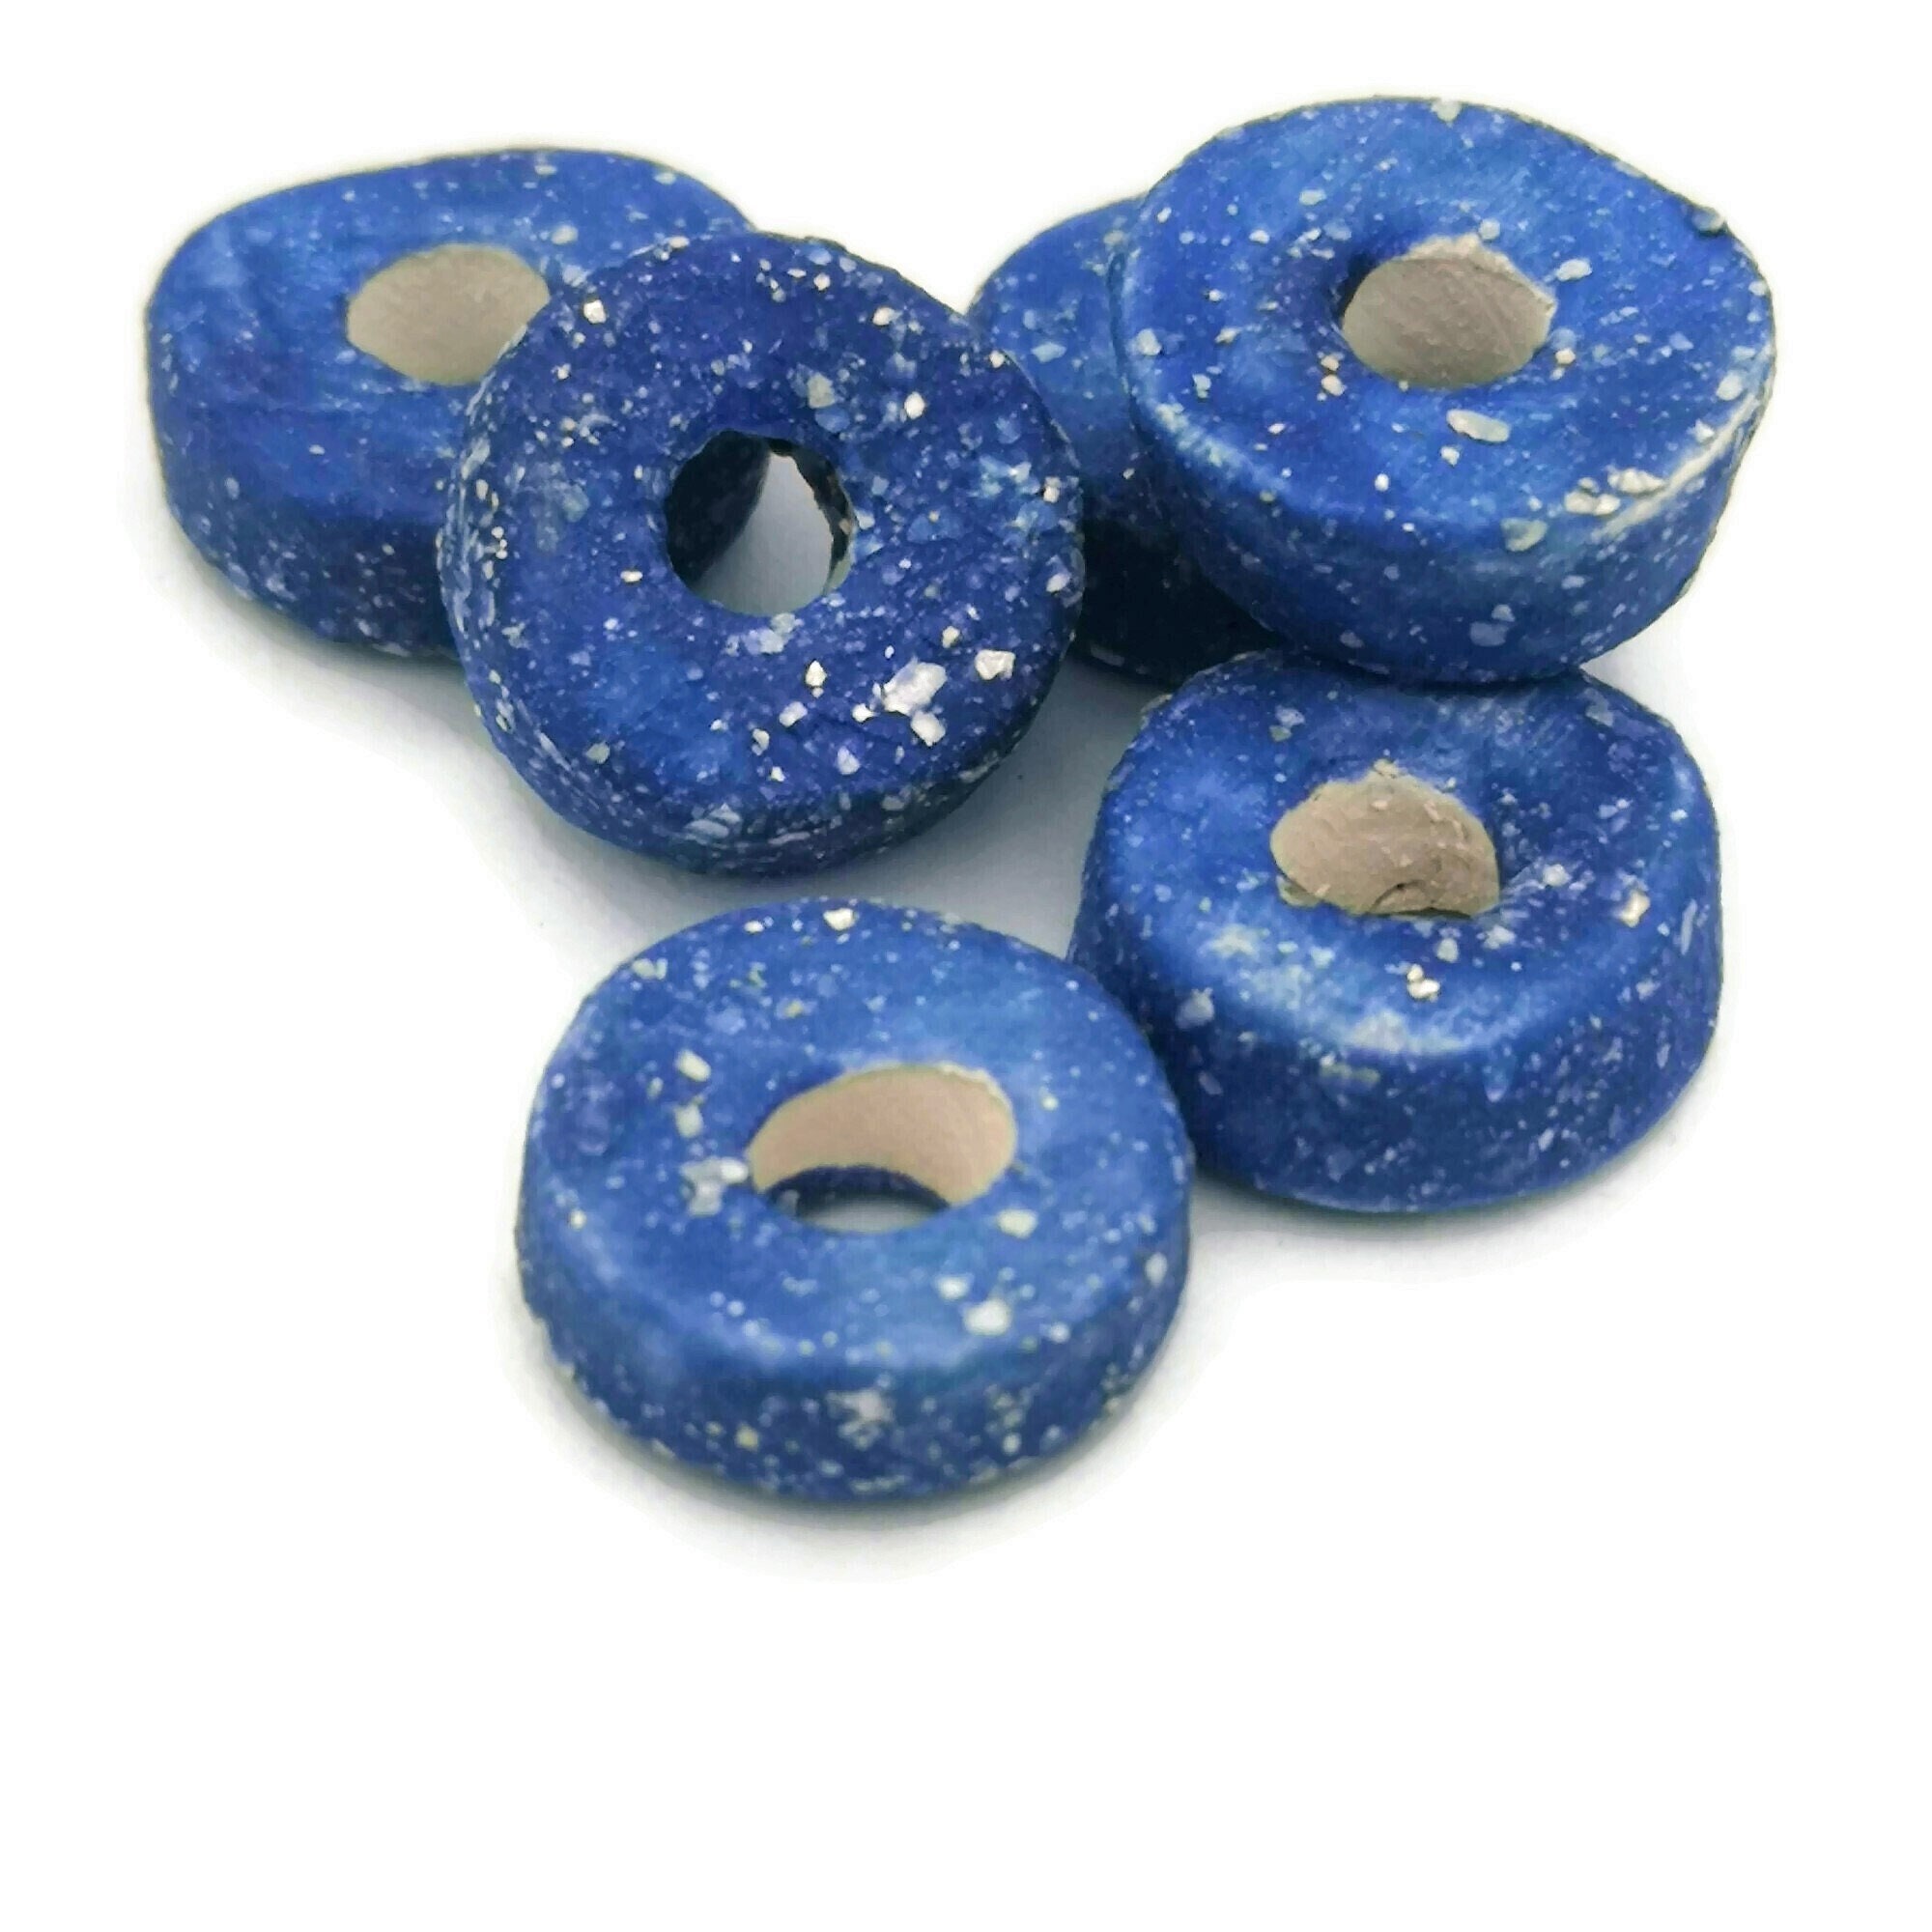 1pc 30mm Extra Large Beads for Jewelry Making, Handmade Ceramic